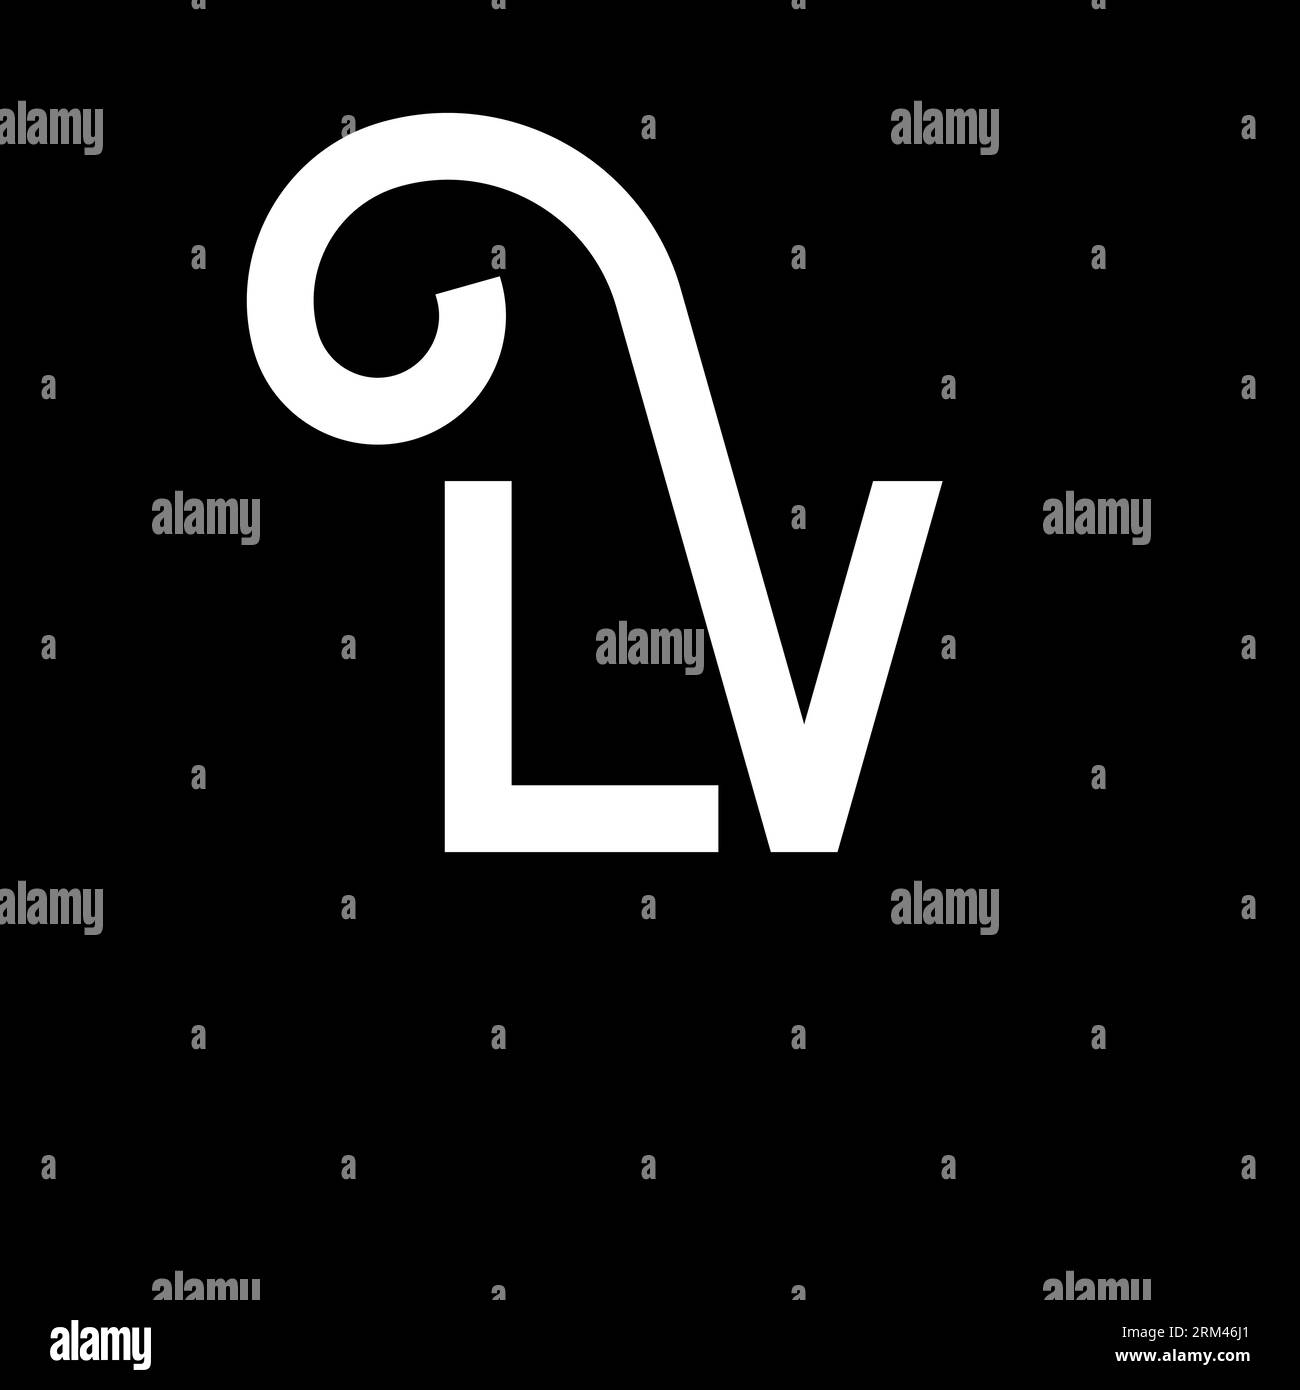 Vl design Black and White Stock Photos & Images - Alamy